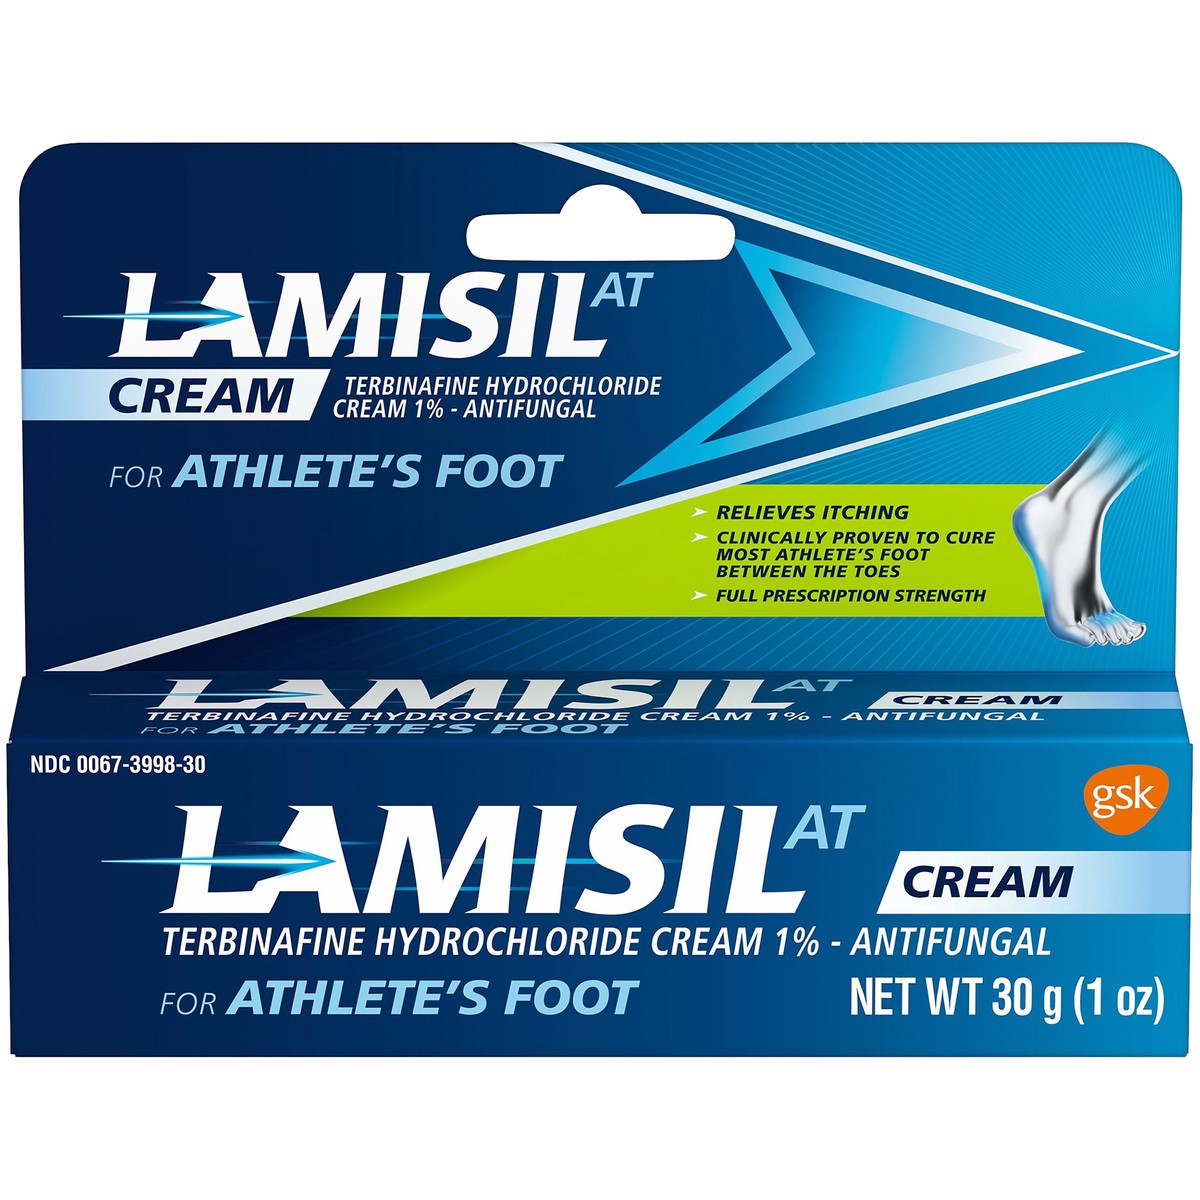 slide 1 of 6, LamisilAT Prescription Strength Athletes Foot Antifungal Cream, Athletes Foot Treatment for Burning, Cracking, Scaling and Itch Relief - 1 Oz, 1 oz